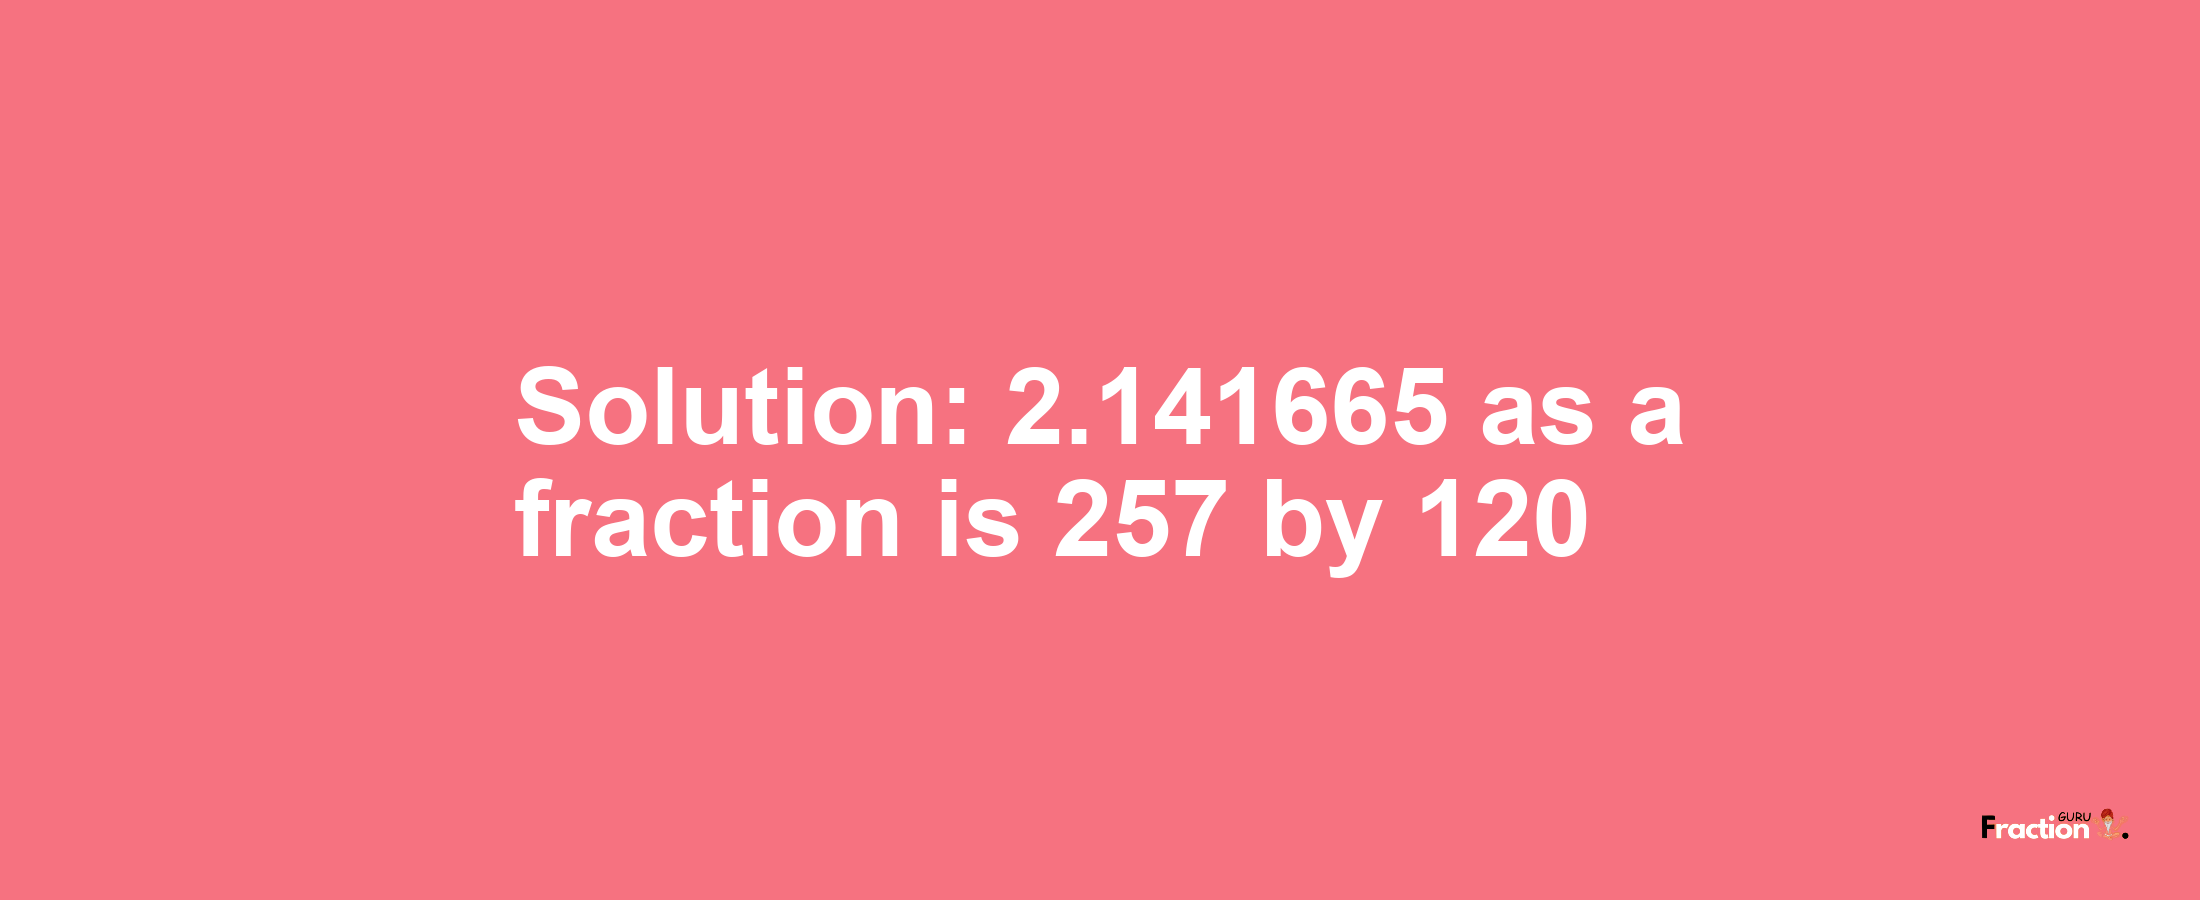 Solution:2.141665 as a fraction is 257/120